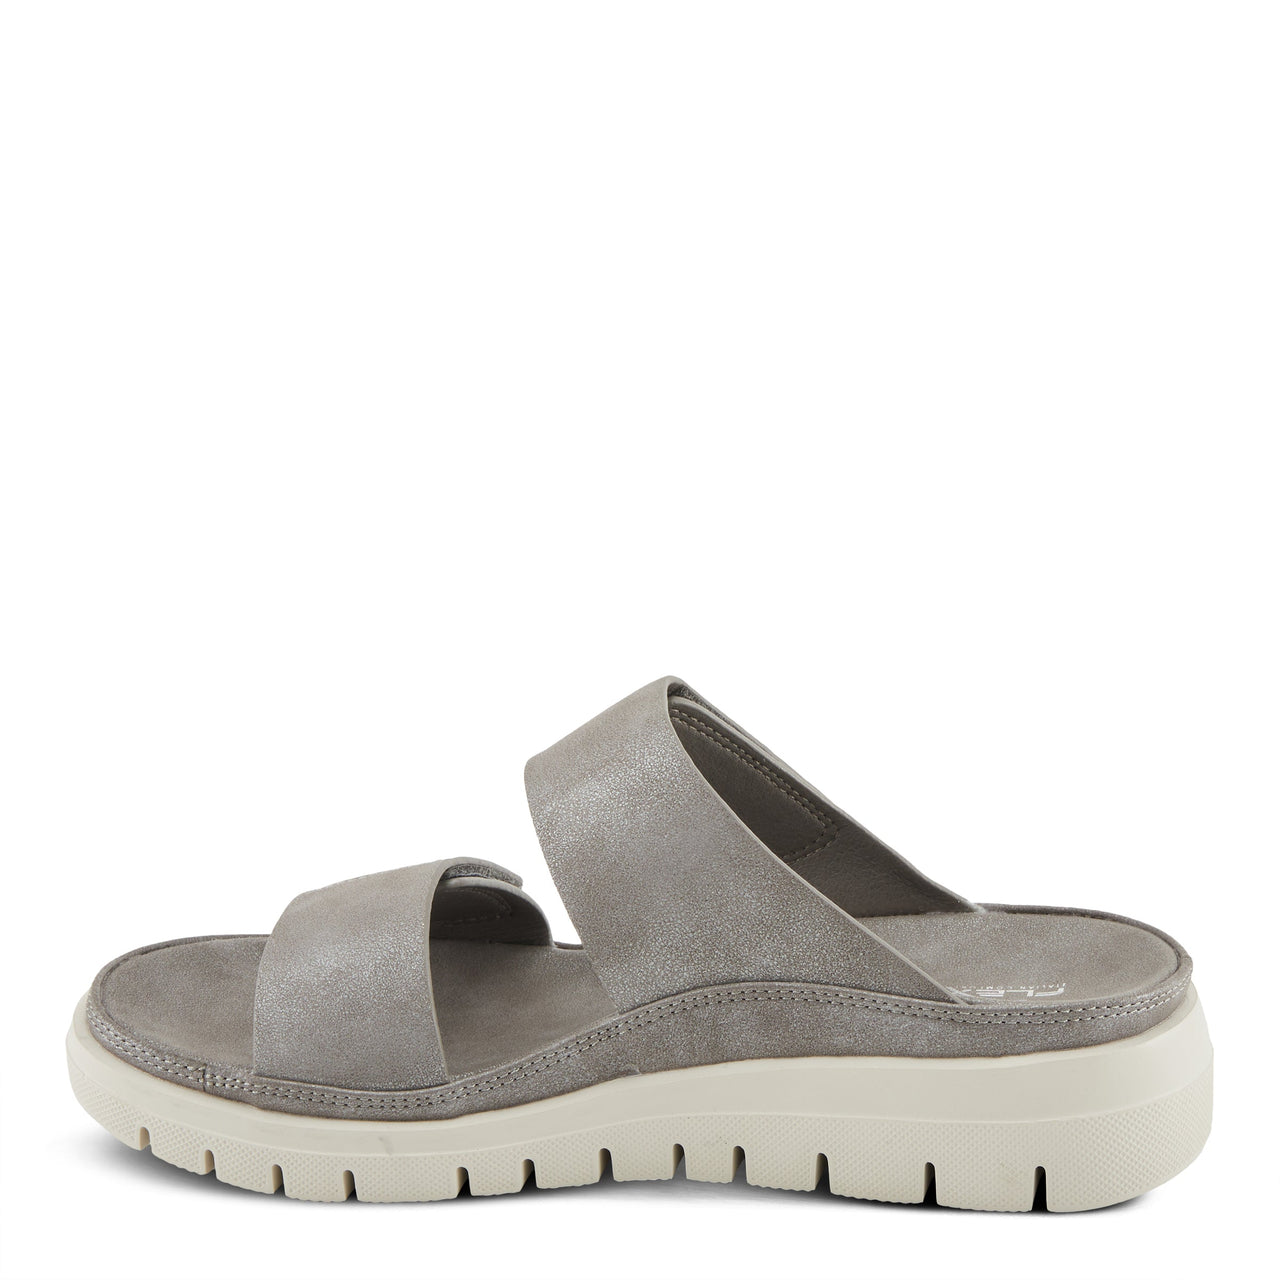 Fashionable Spring Step Shoes Flexus Buttony Sandals in metallic silver nubuck with decorative button accents